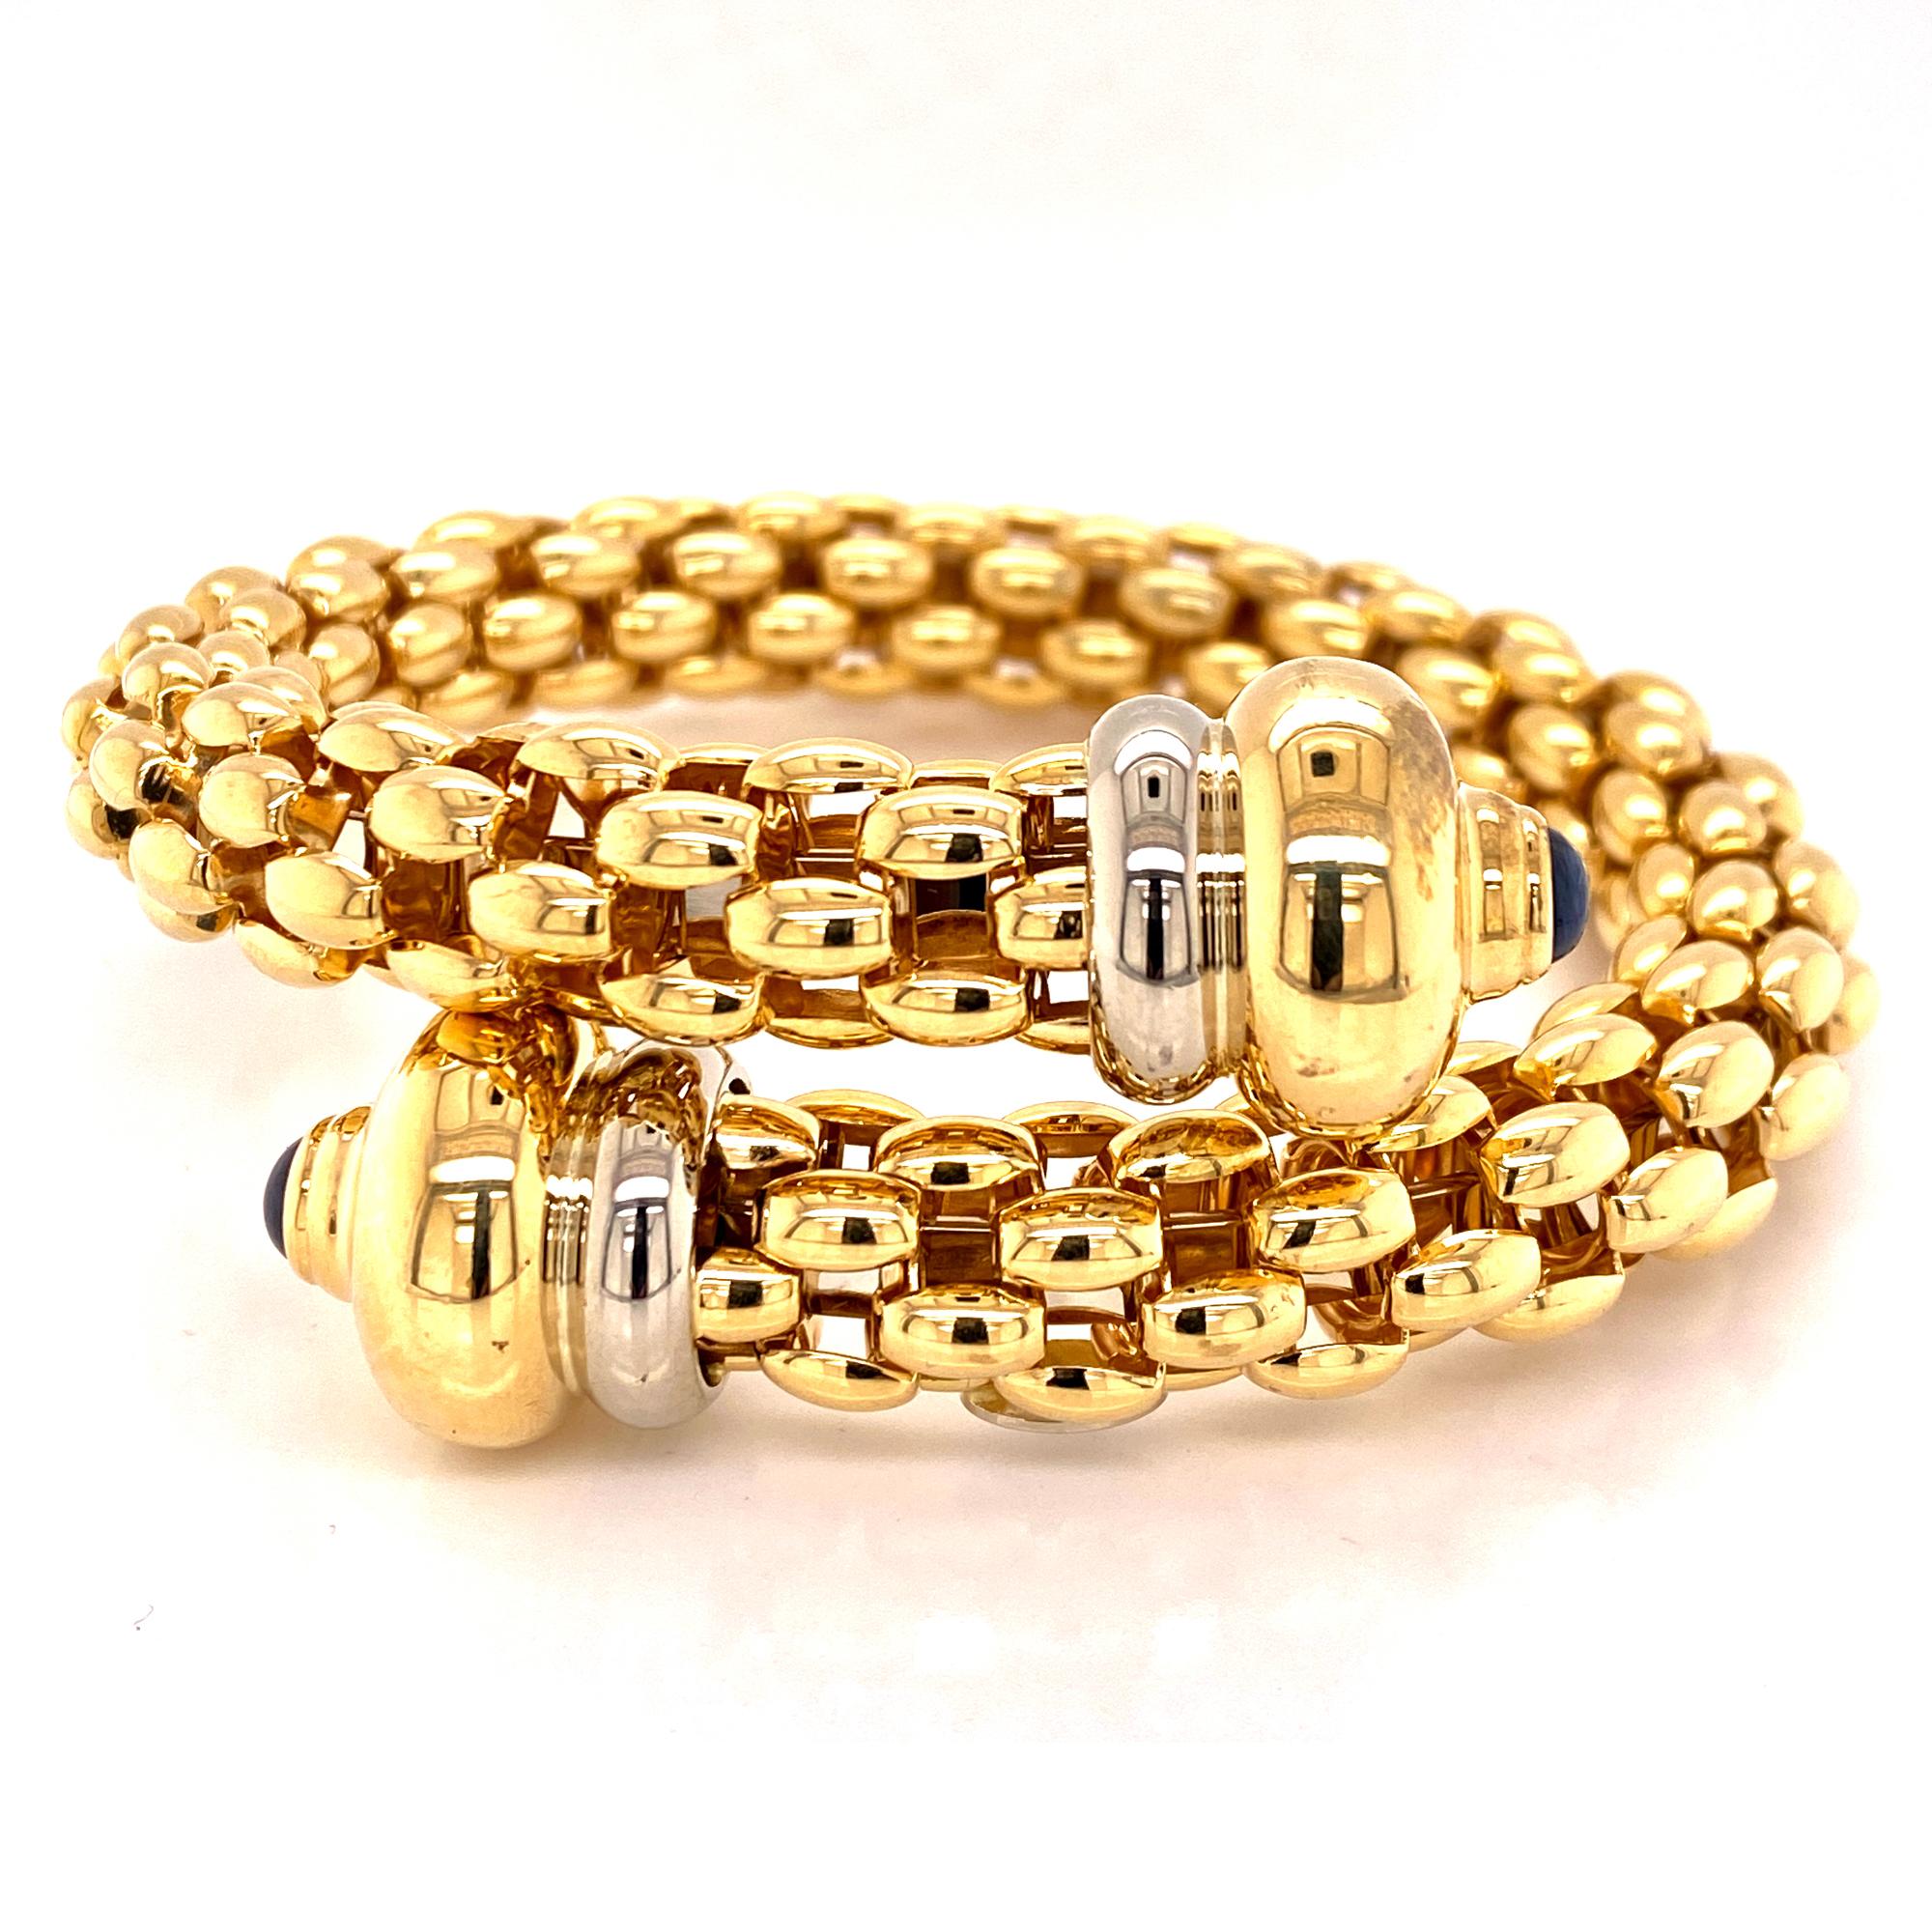 Italian 18 karat gold coil bracelet by designer Fope. The flexible bracelet features cabochon sapphire endcaps. The bracelet measures 2.25 inches in diameter and can fit many wrist sizes.